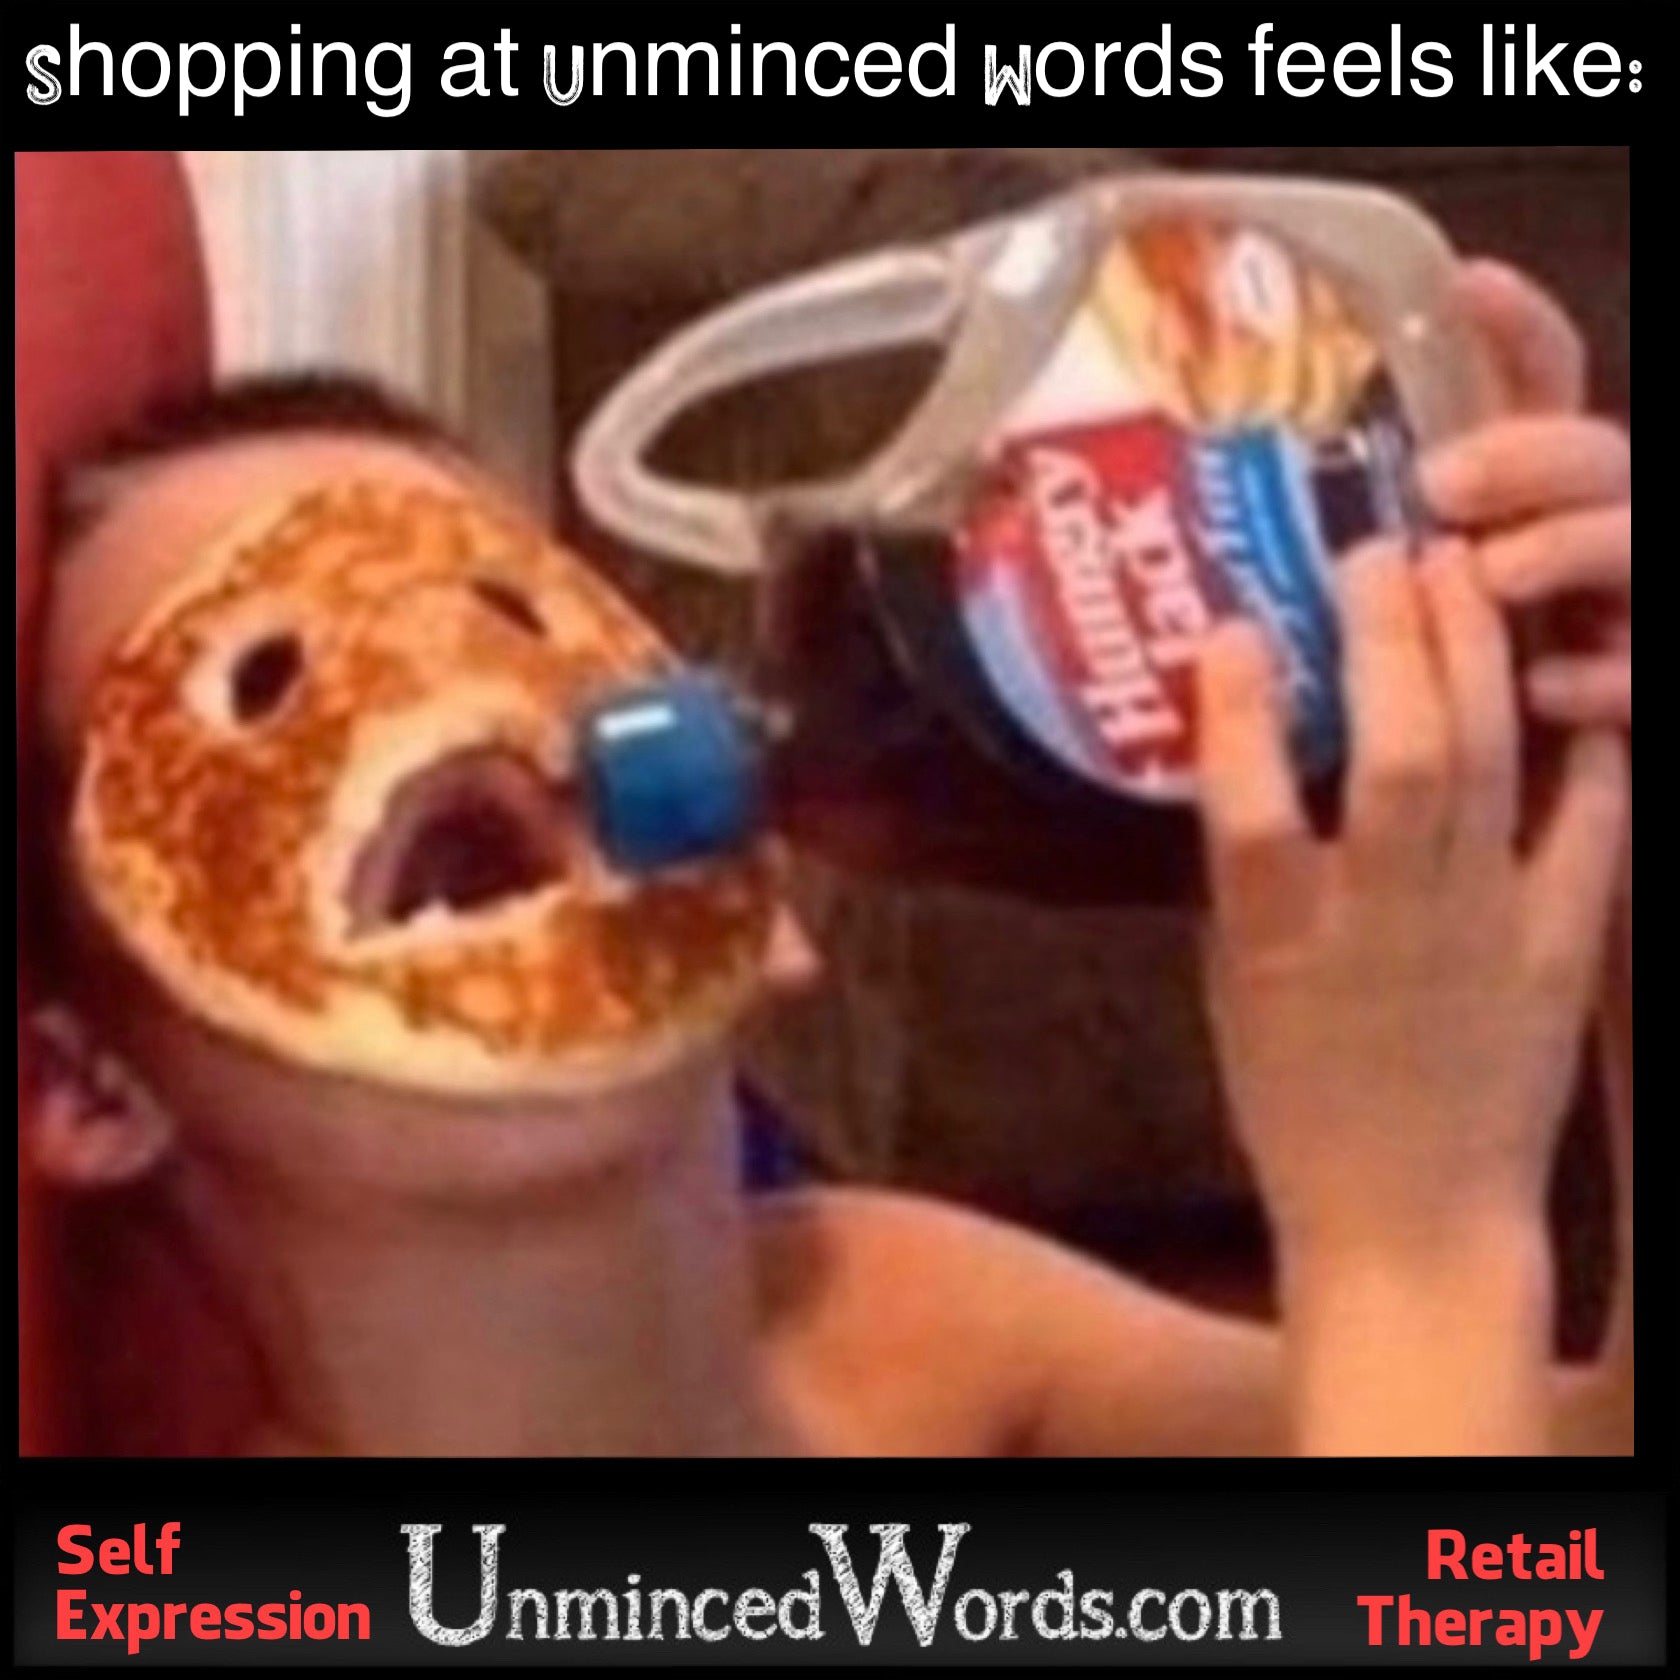 Shopping at UnmincedWords.com feels like: